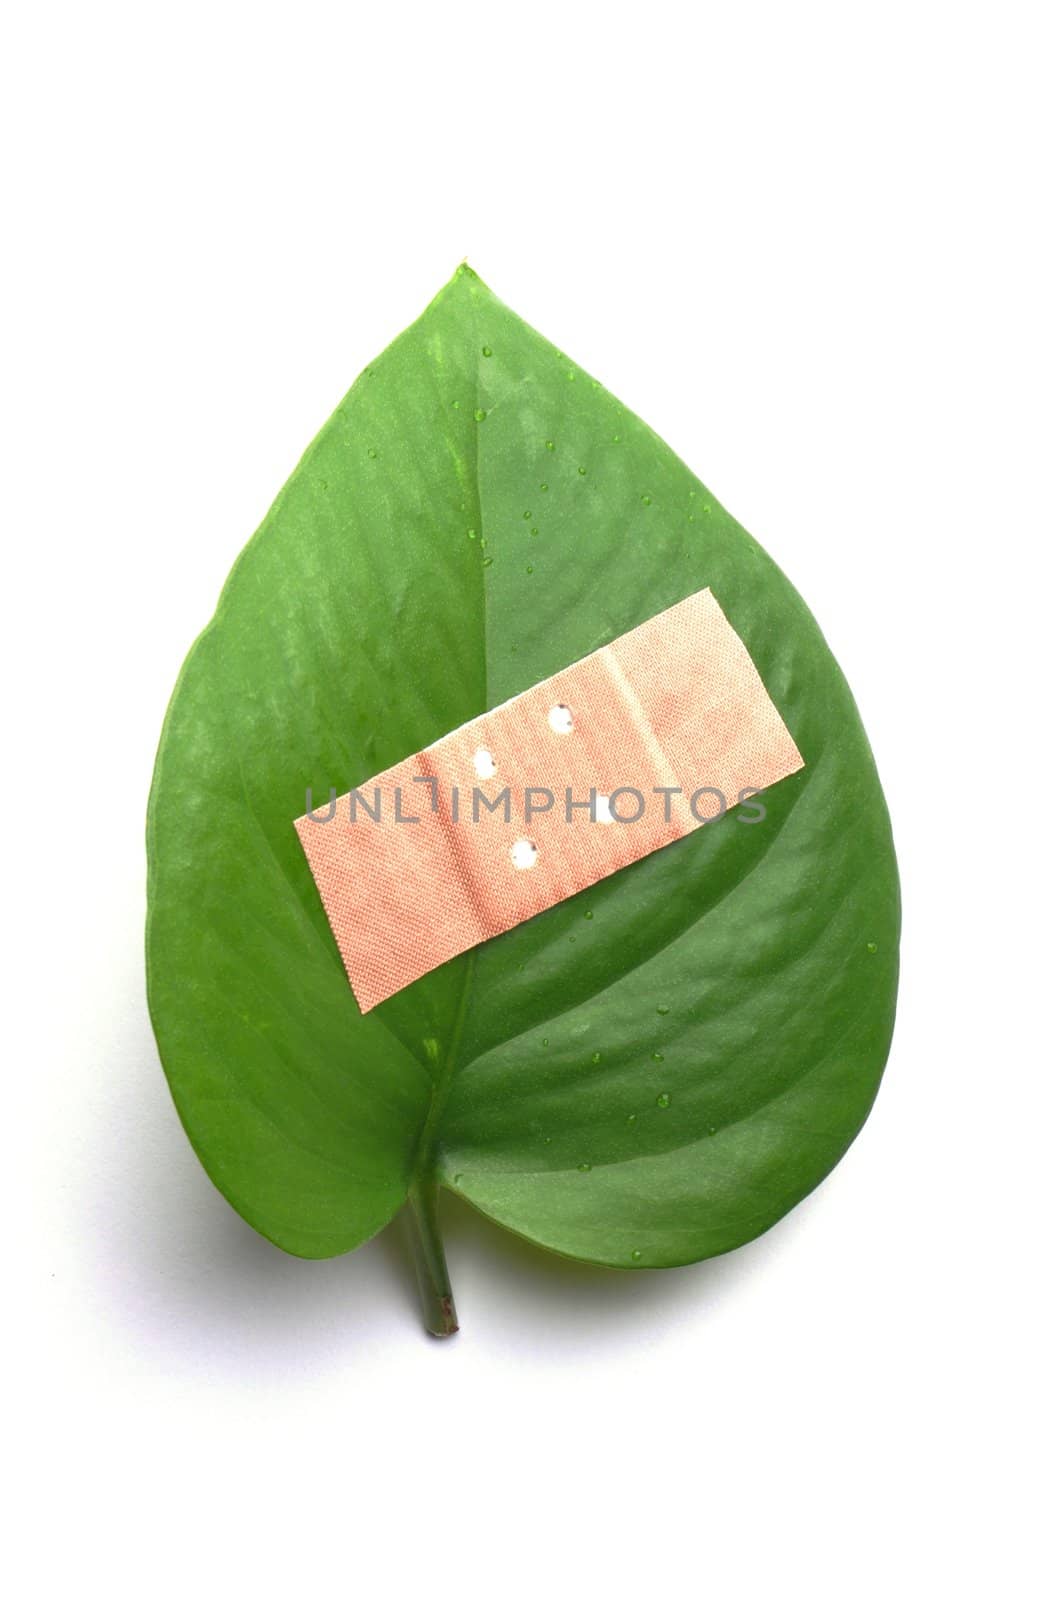 eco ecology ecological nature or environmental concept with green leaf and band aid on white